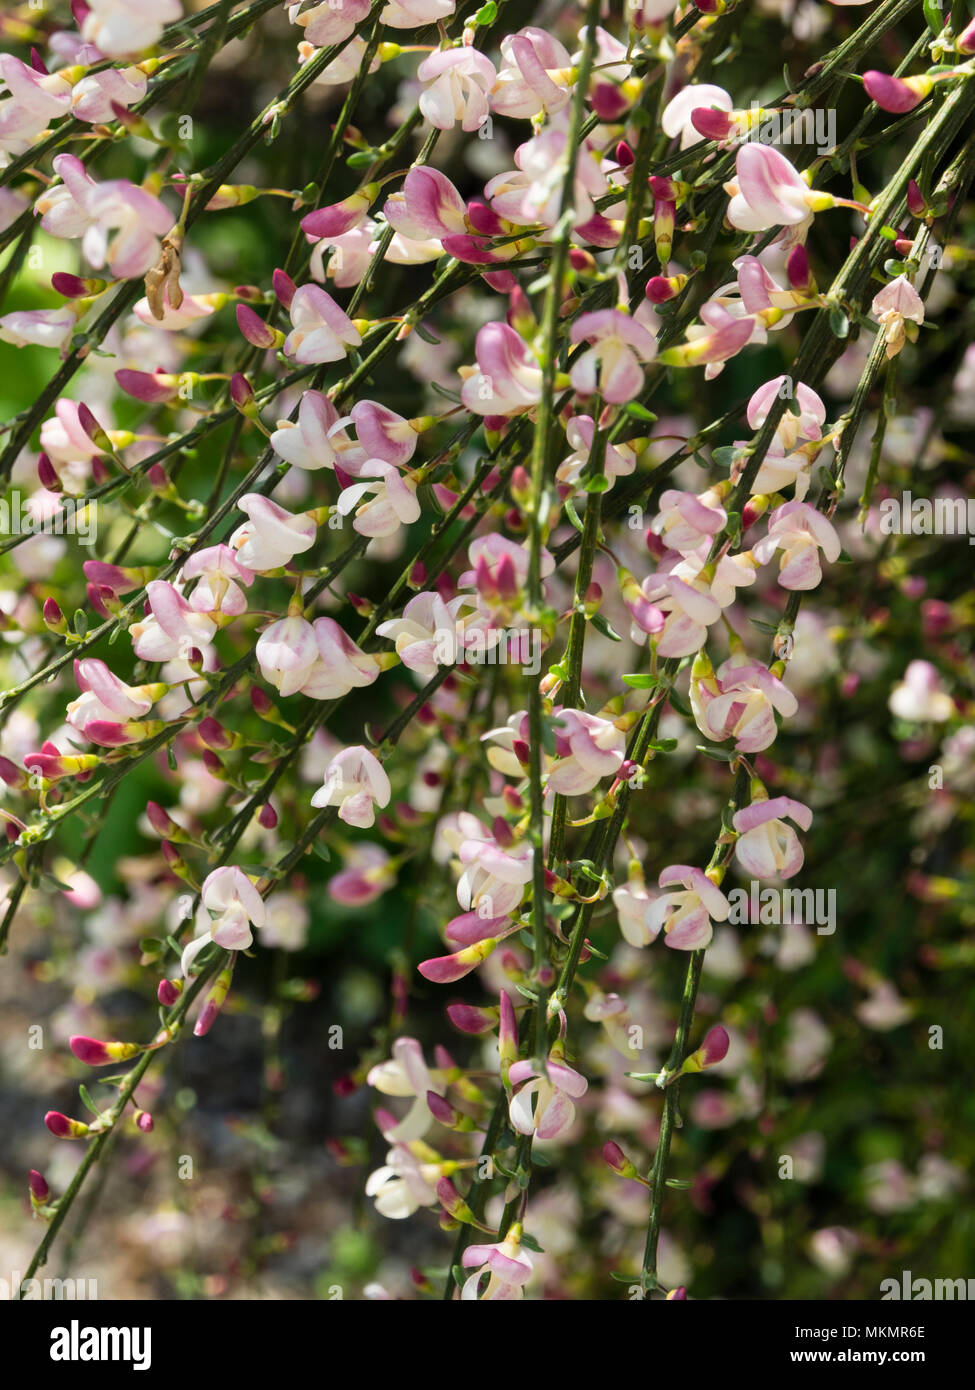 Pink and white flowers of the arching, twiggy common broom variety, Cytisus scoparius 'Moyclare Pink' Stock Photo